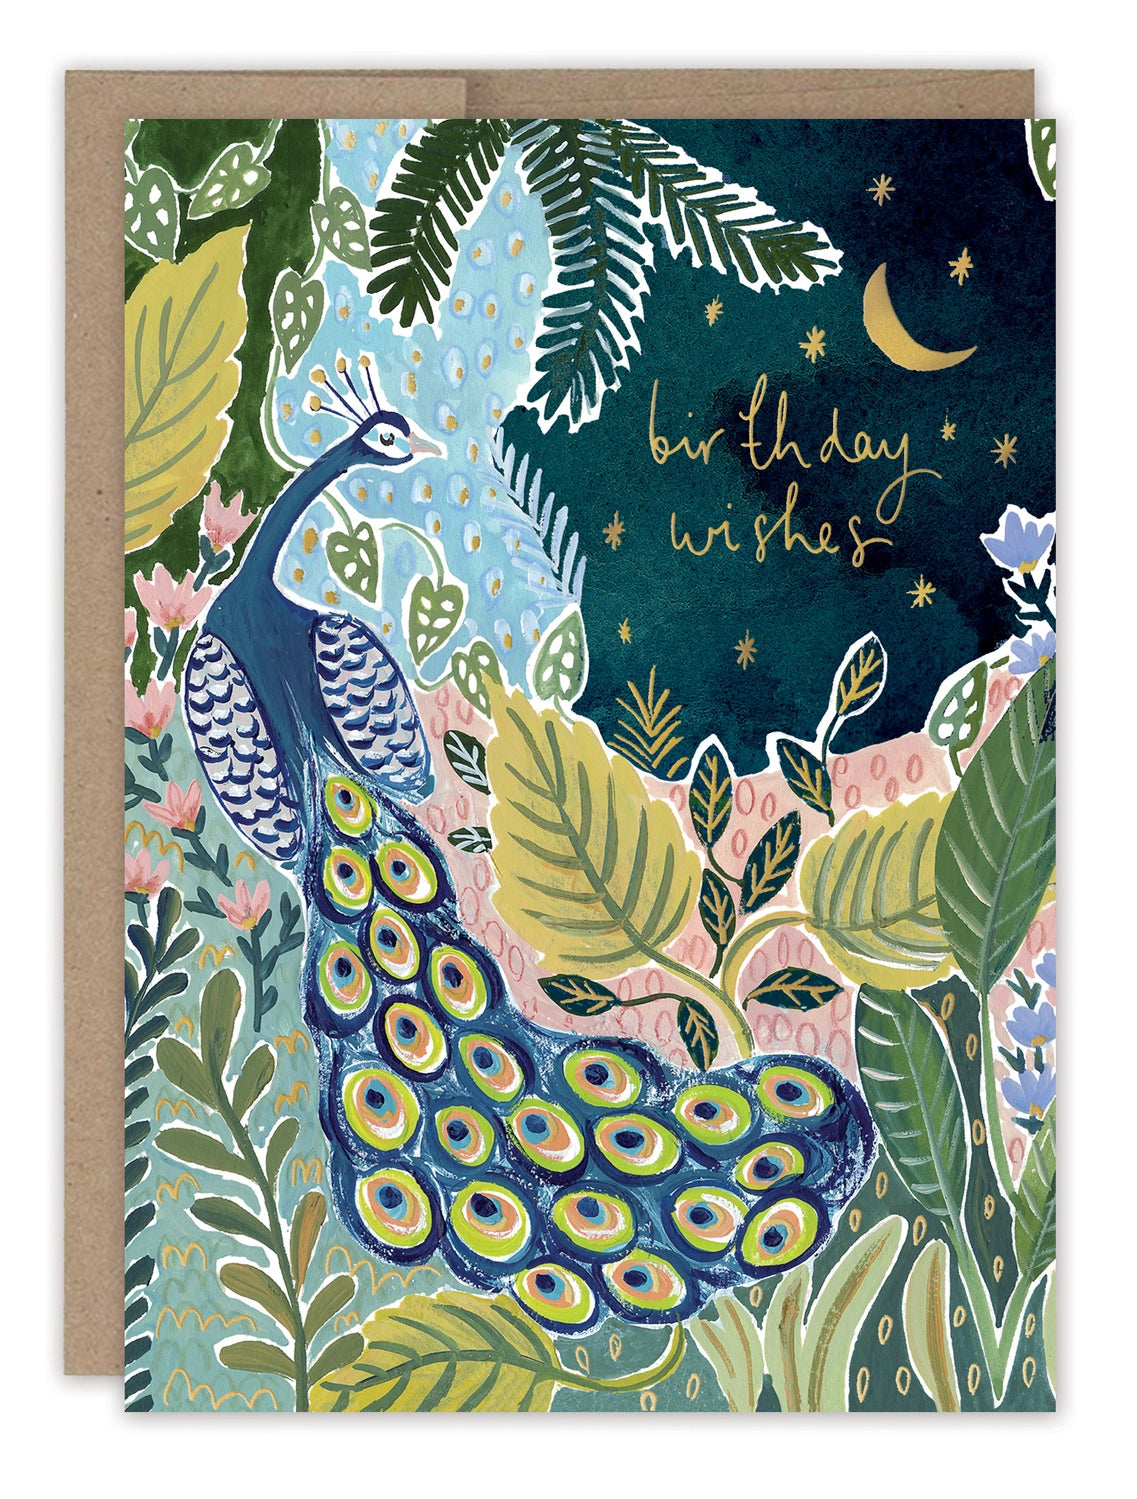 Peacock Birthday Wishes Card - Moon Room Shop and Wellness